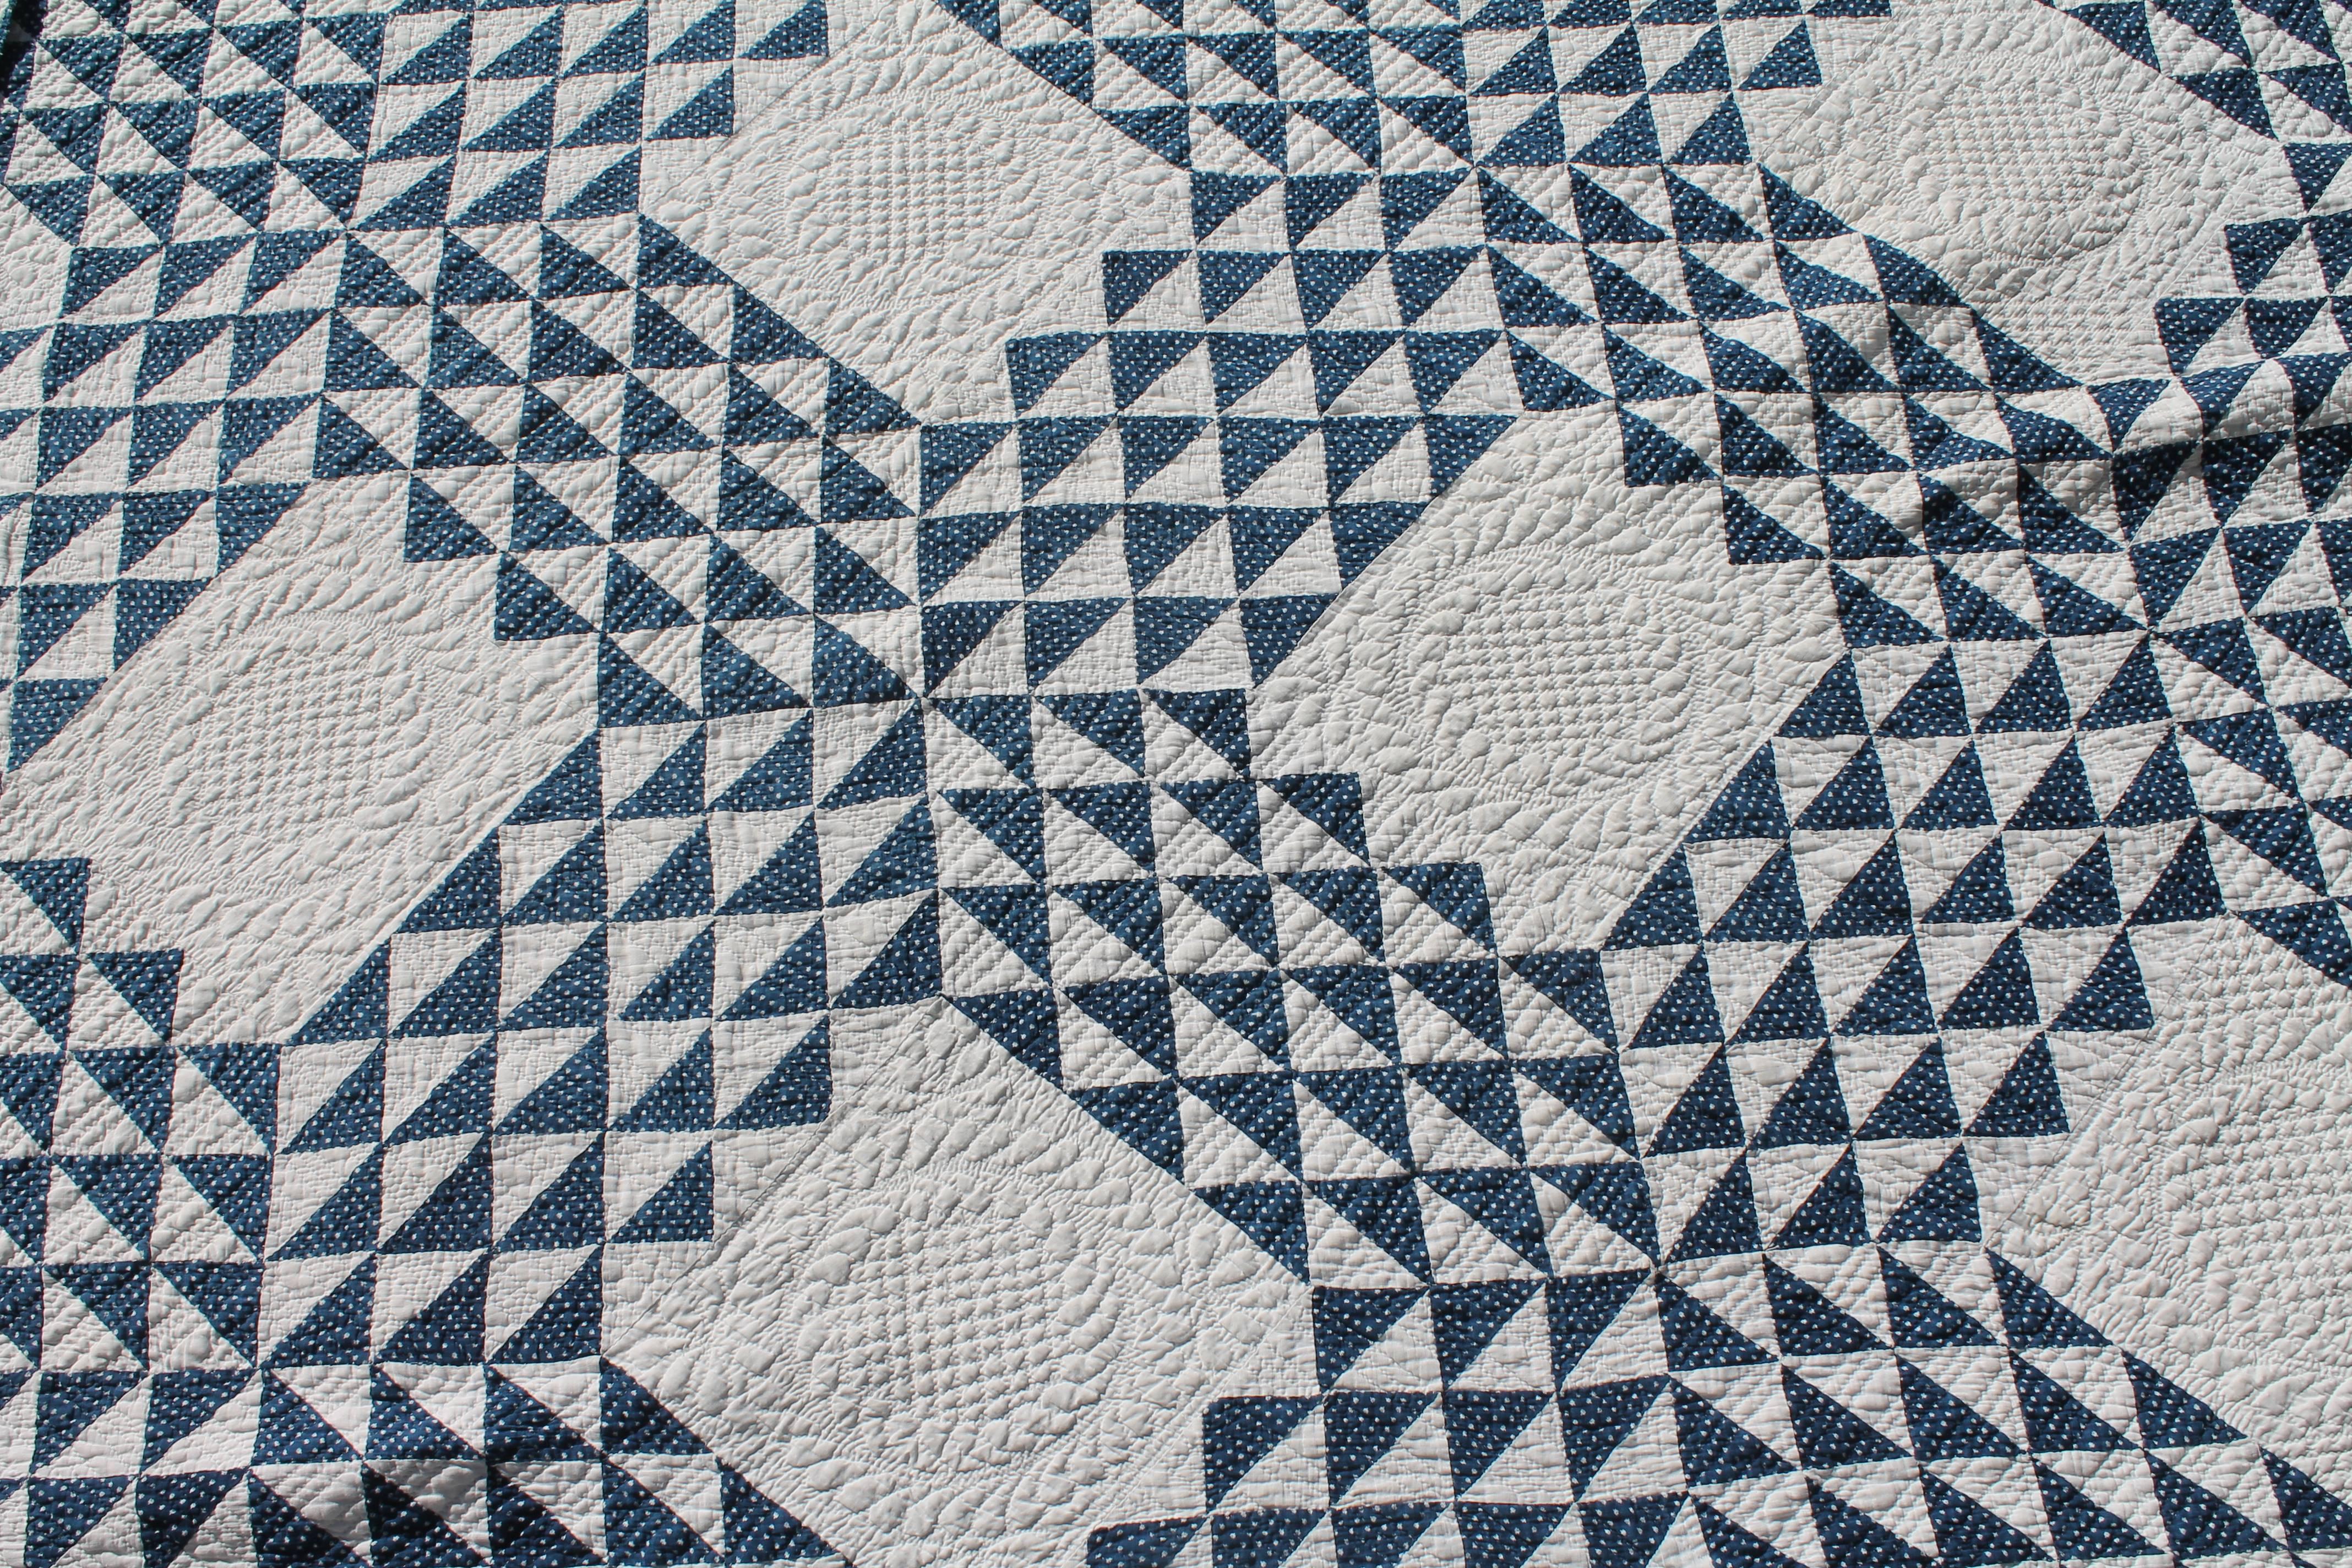 Country Vintage Quilt Blue and White Ocean Waves